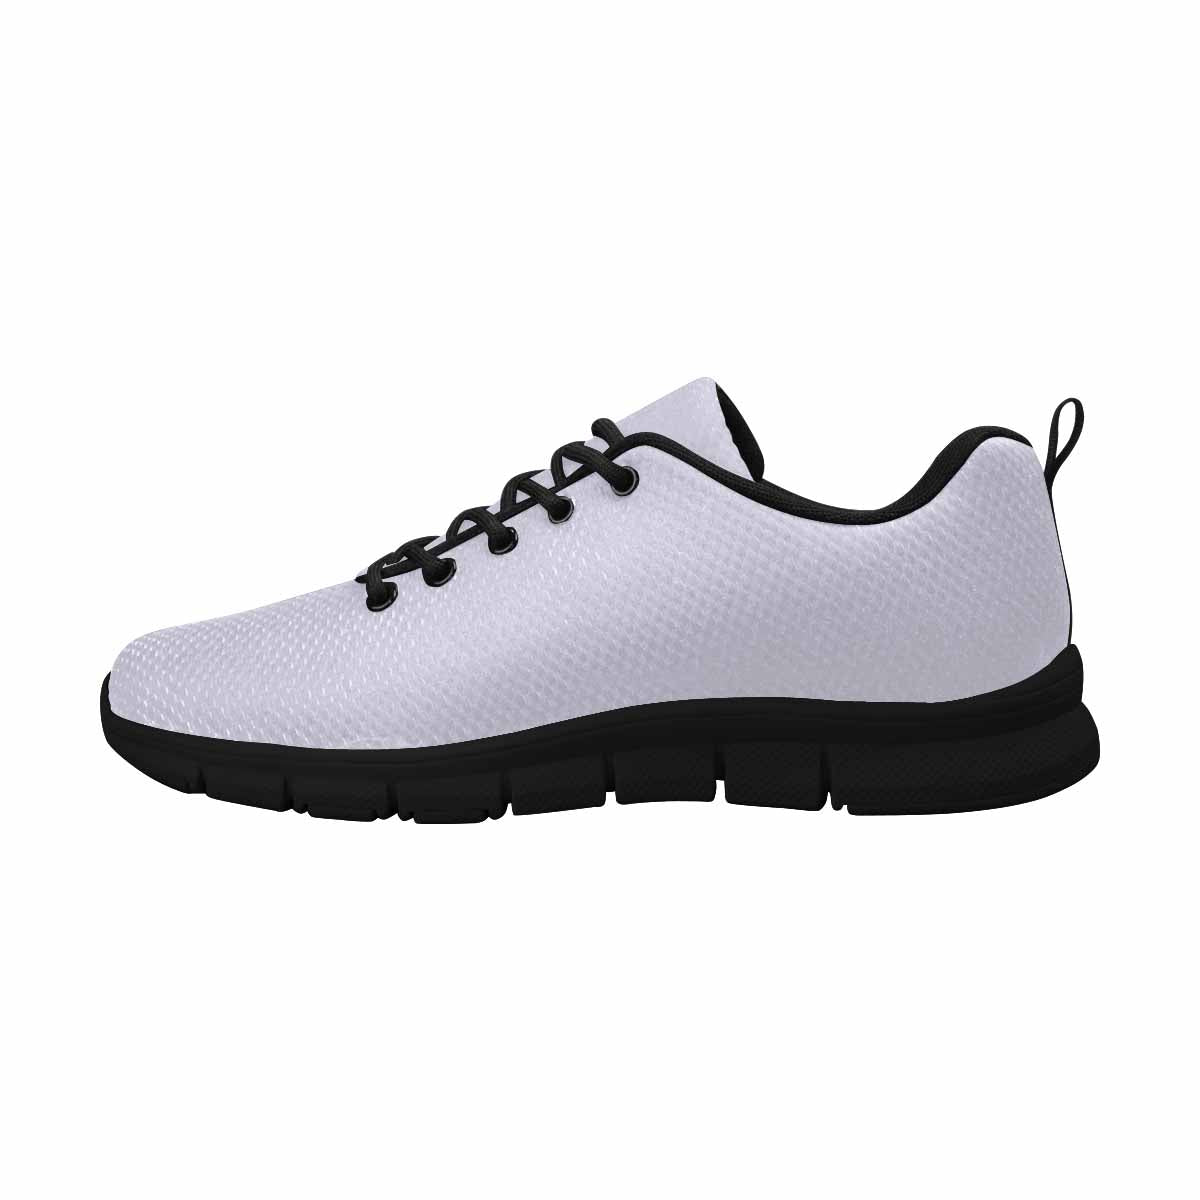 Sneakers For Men, Lavender Purple Running Shoes